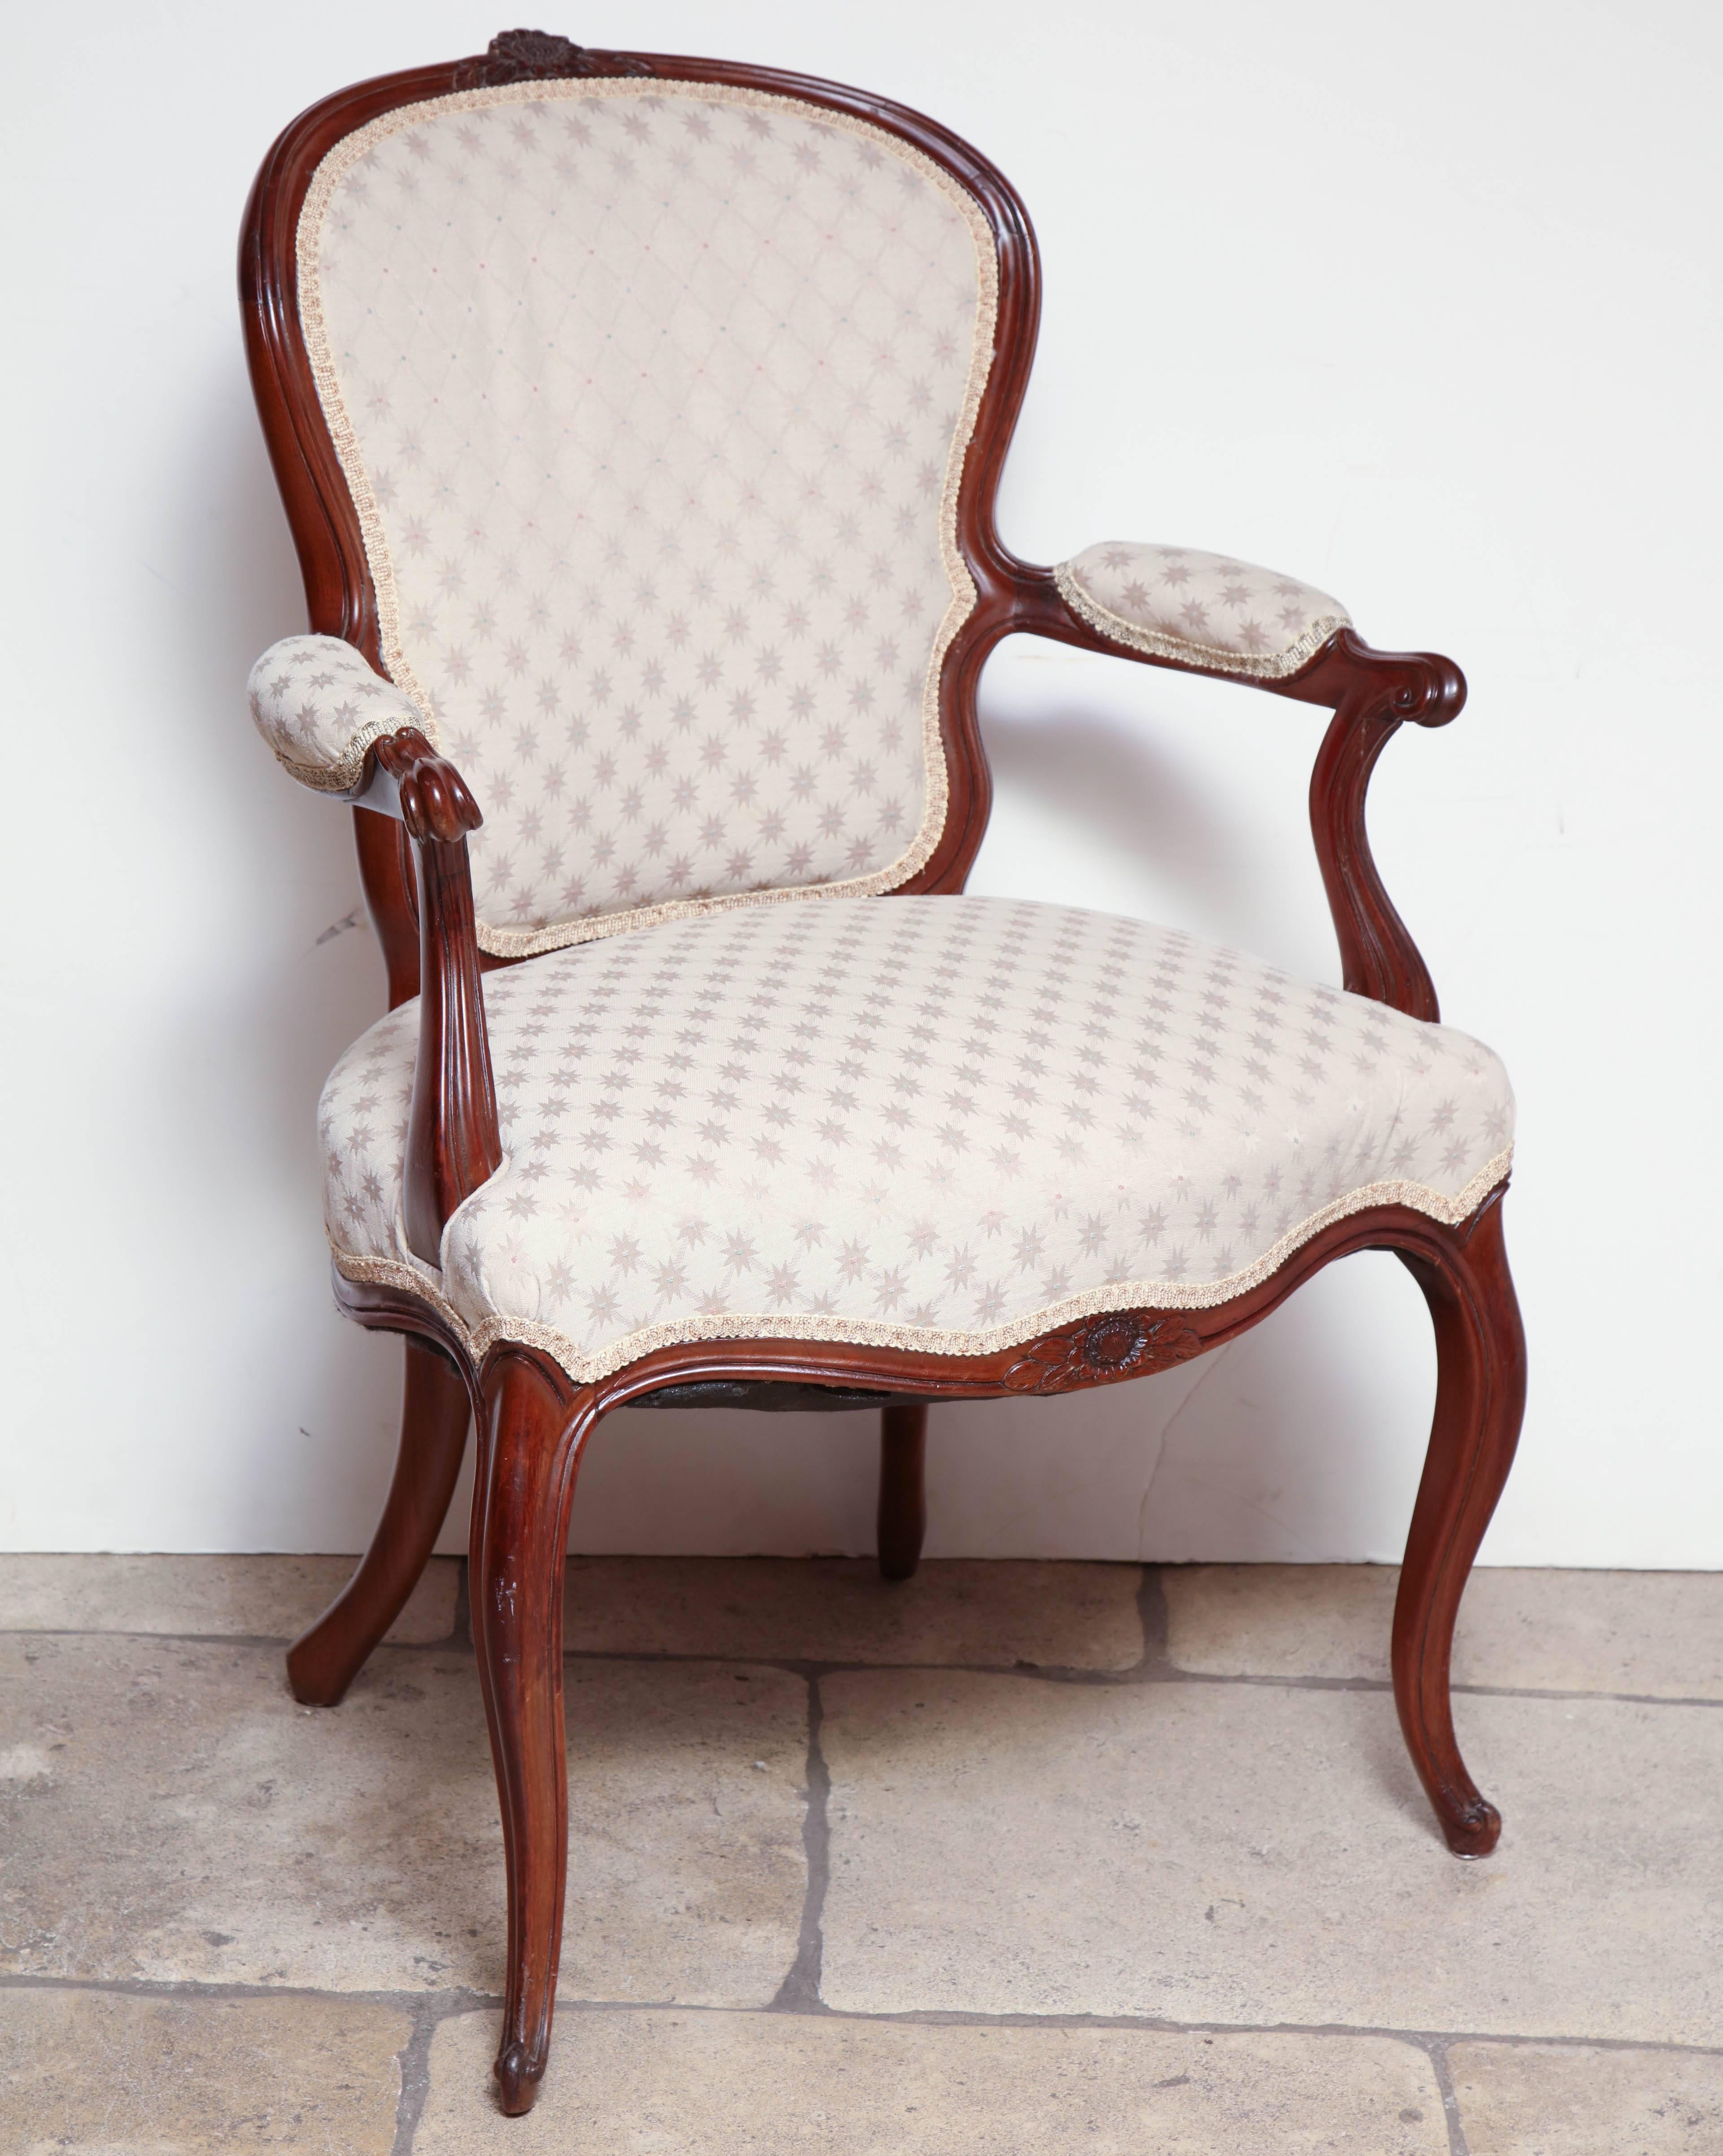 A pair of George III (Hepplewhite) carved open armchairs with upholstered back, arms and cushions with a serpentine carve rail and cabriole legs.